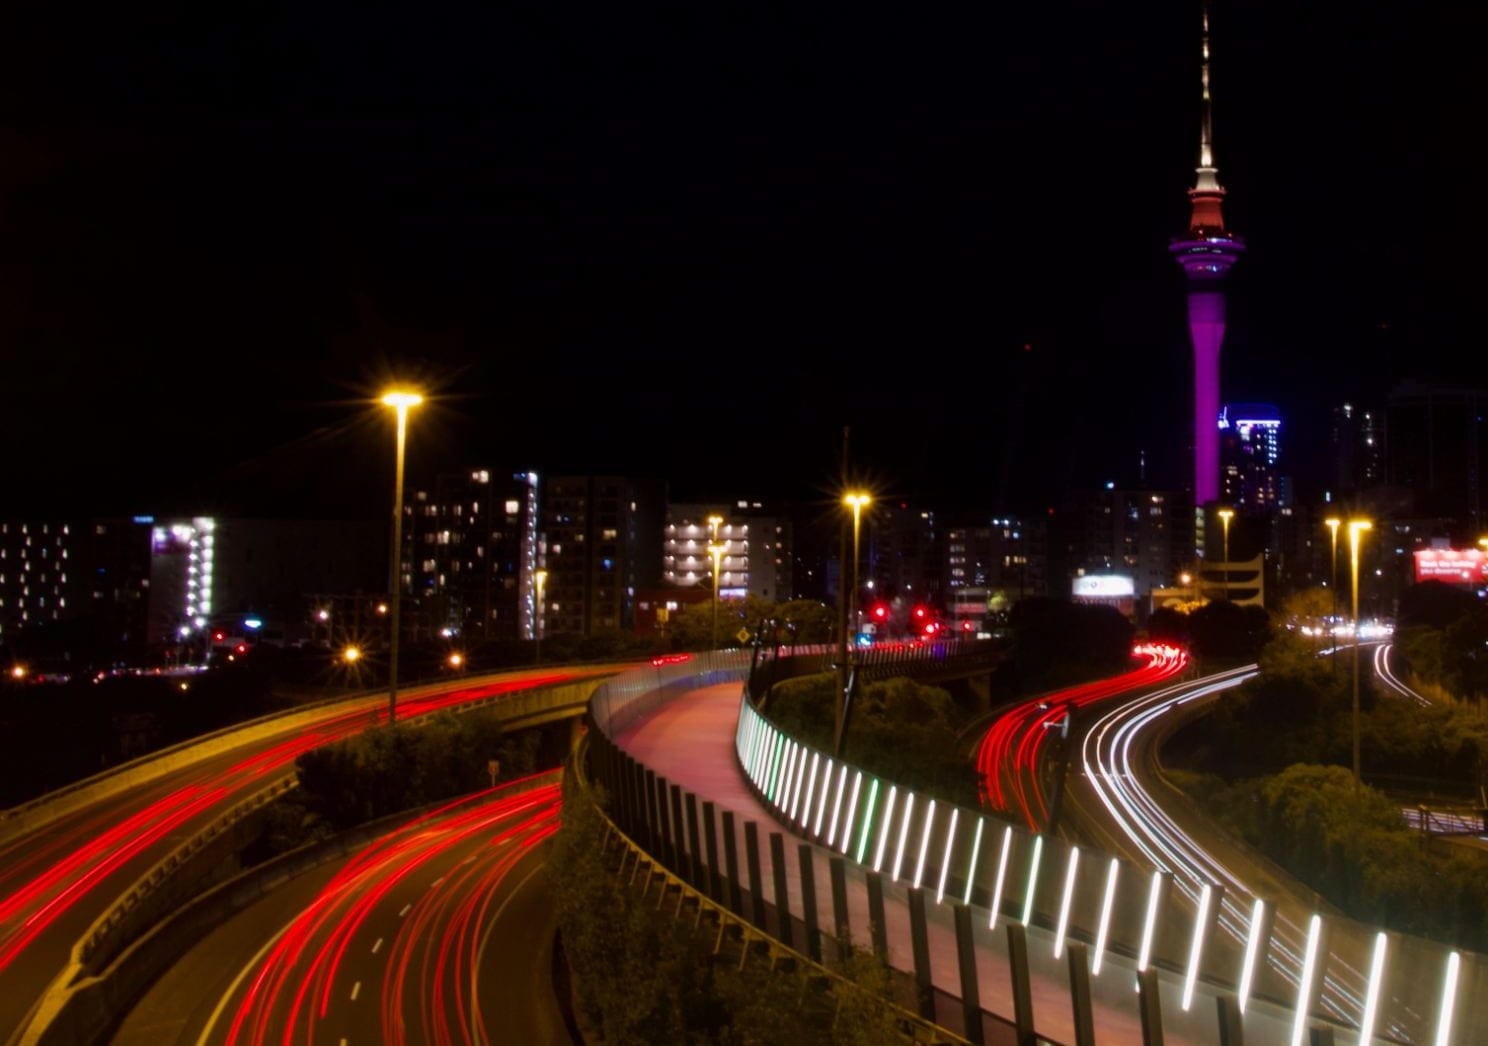 Auckland Sky Tower and cycle path at night. The tower is lit up pink.